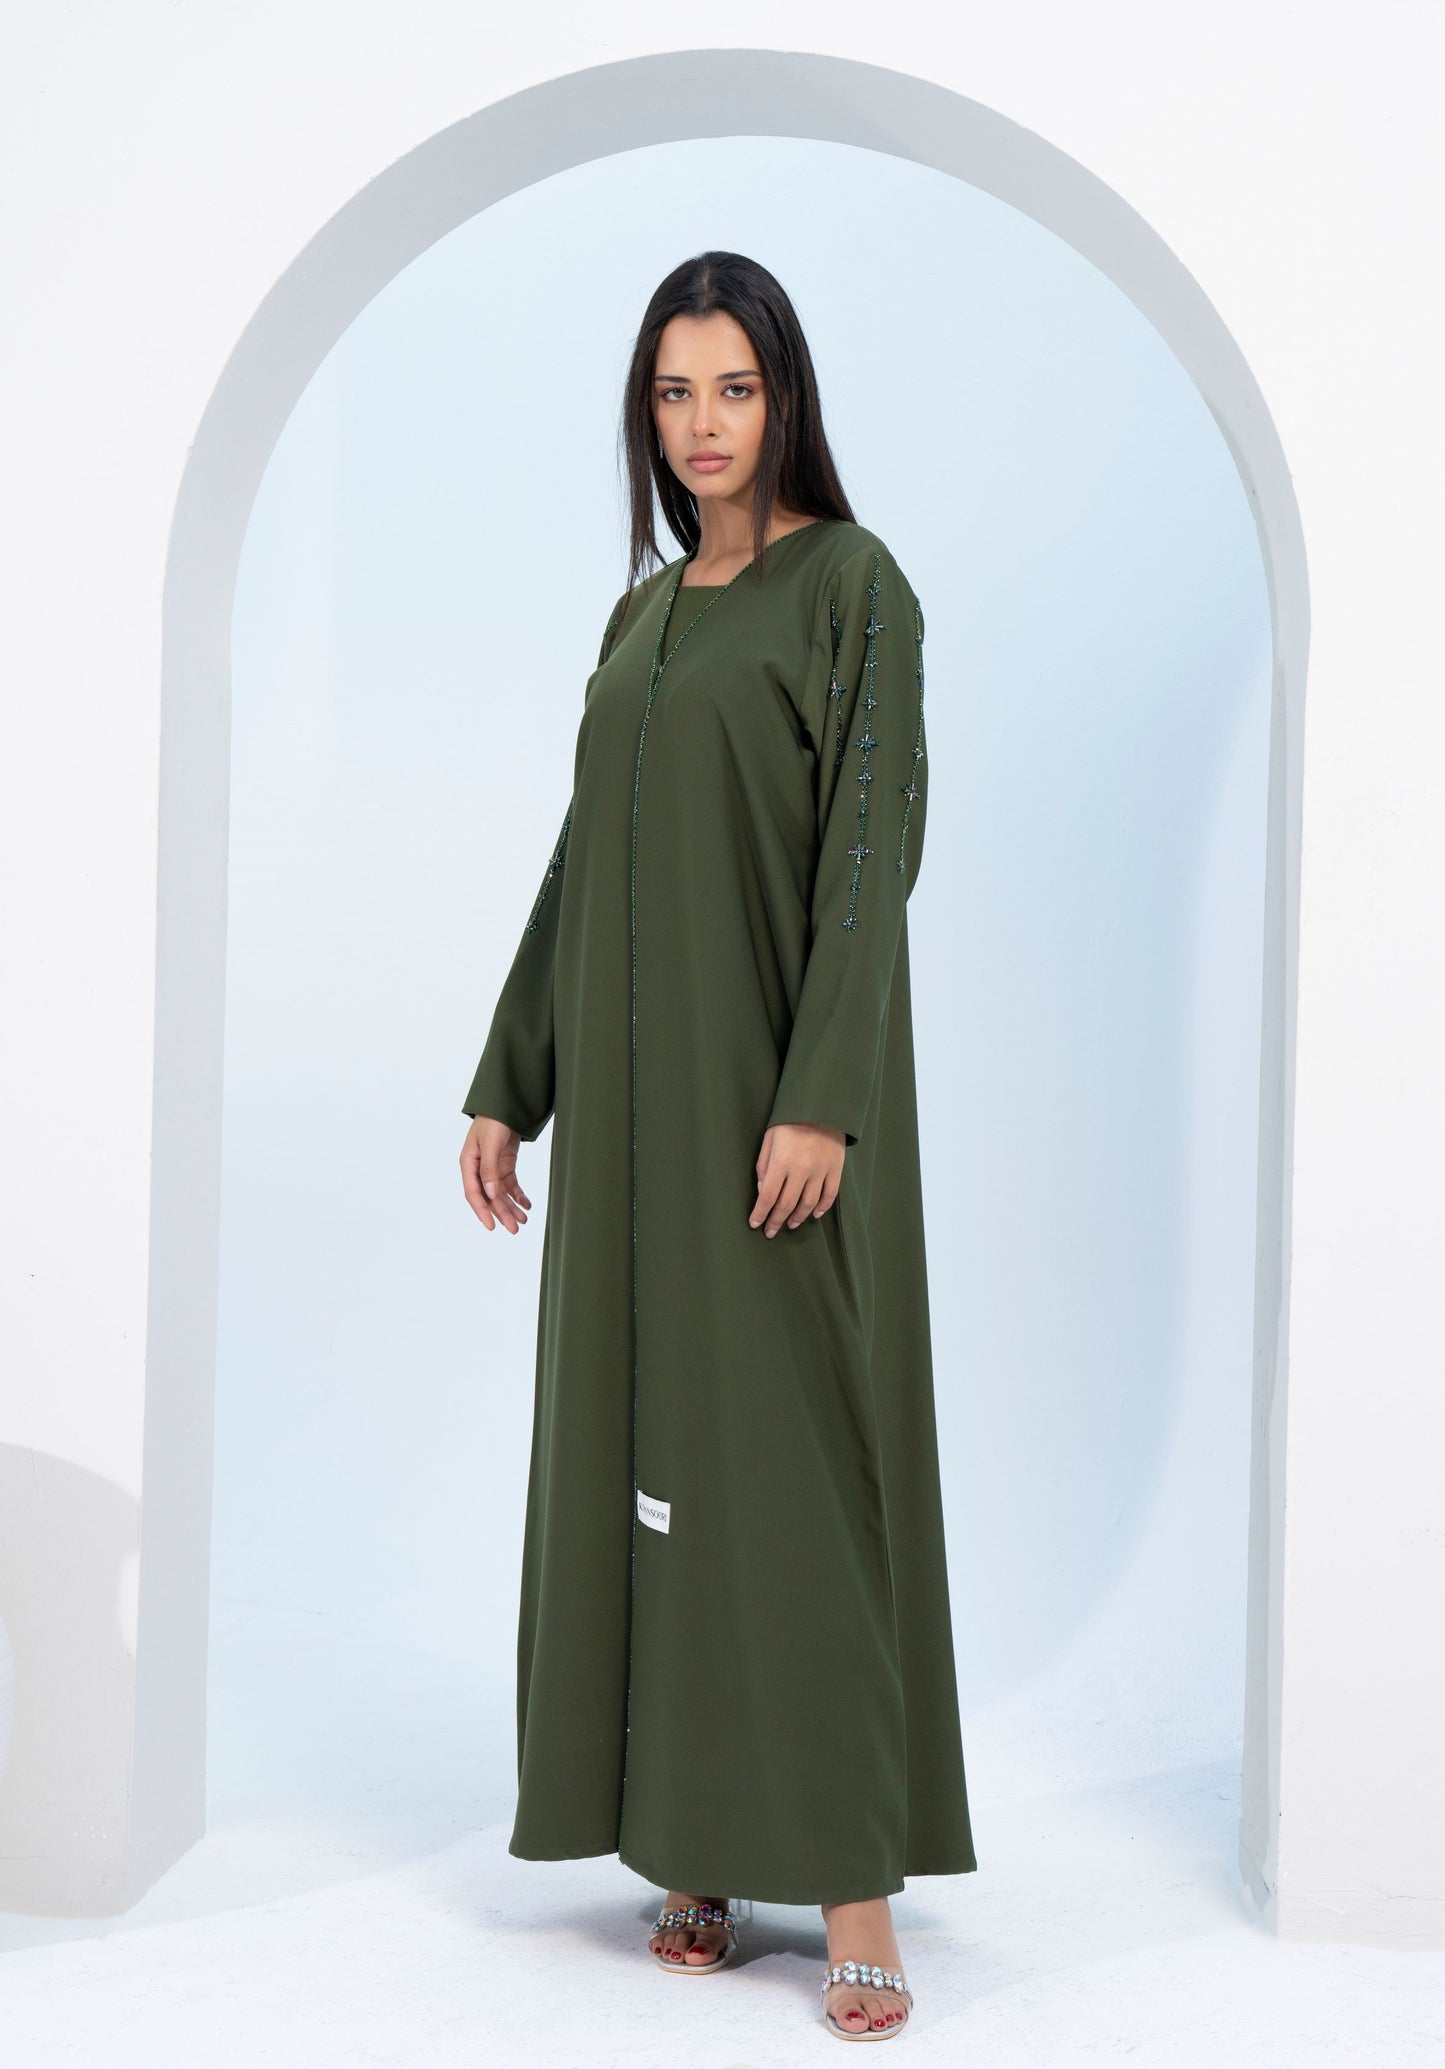 Green V-Neck Abaya with Star Line Embellishments on Sleeves and Flap